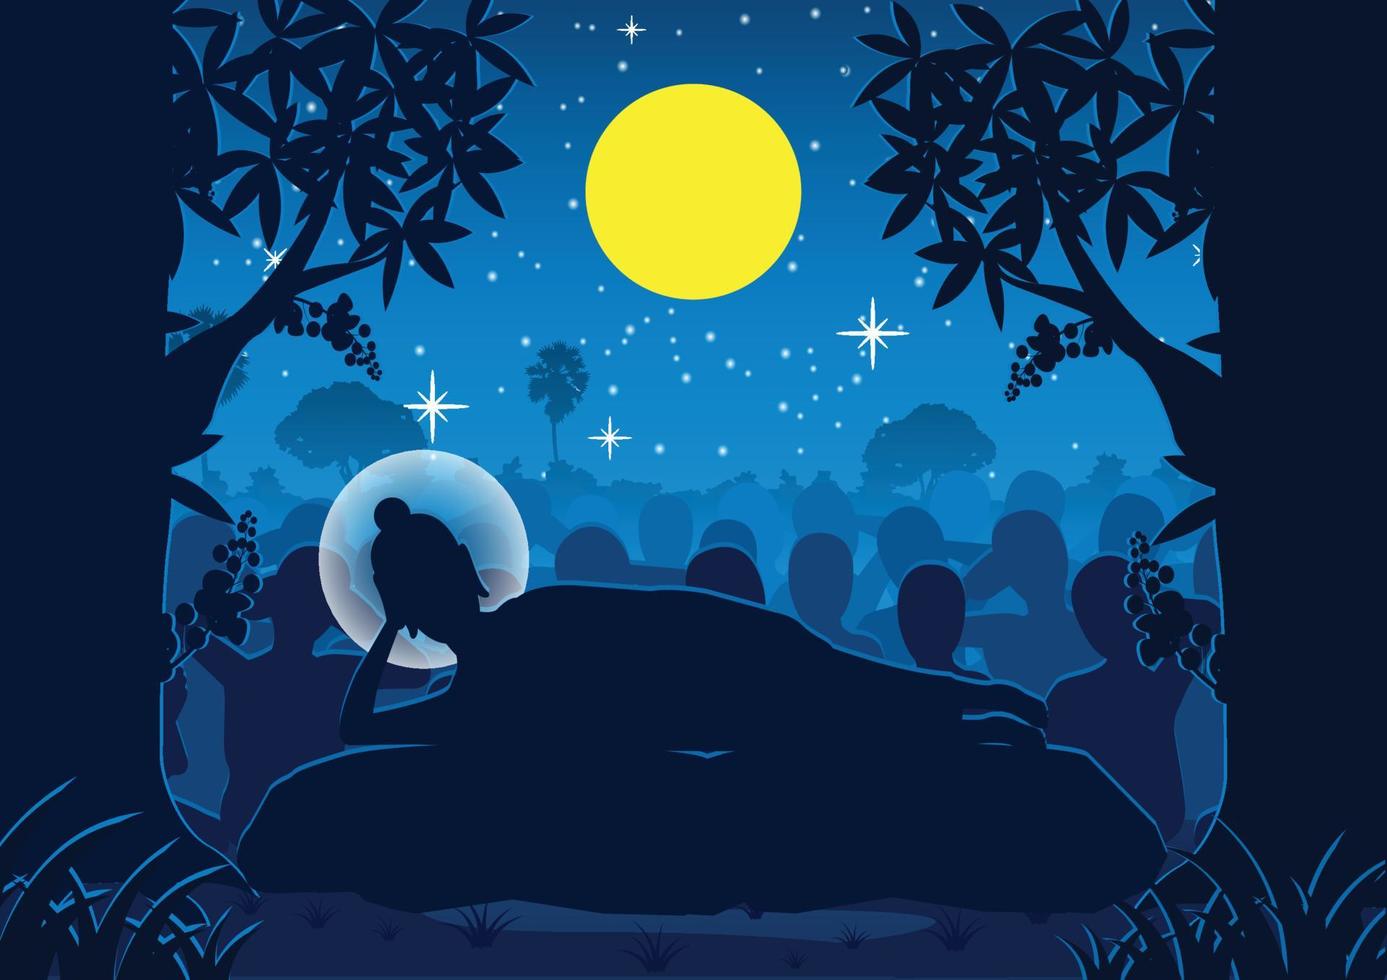 lord of Buddha was dead under tree ,used well for important days of Buddhism vector